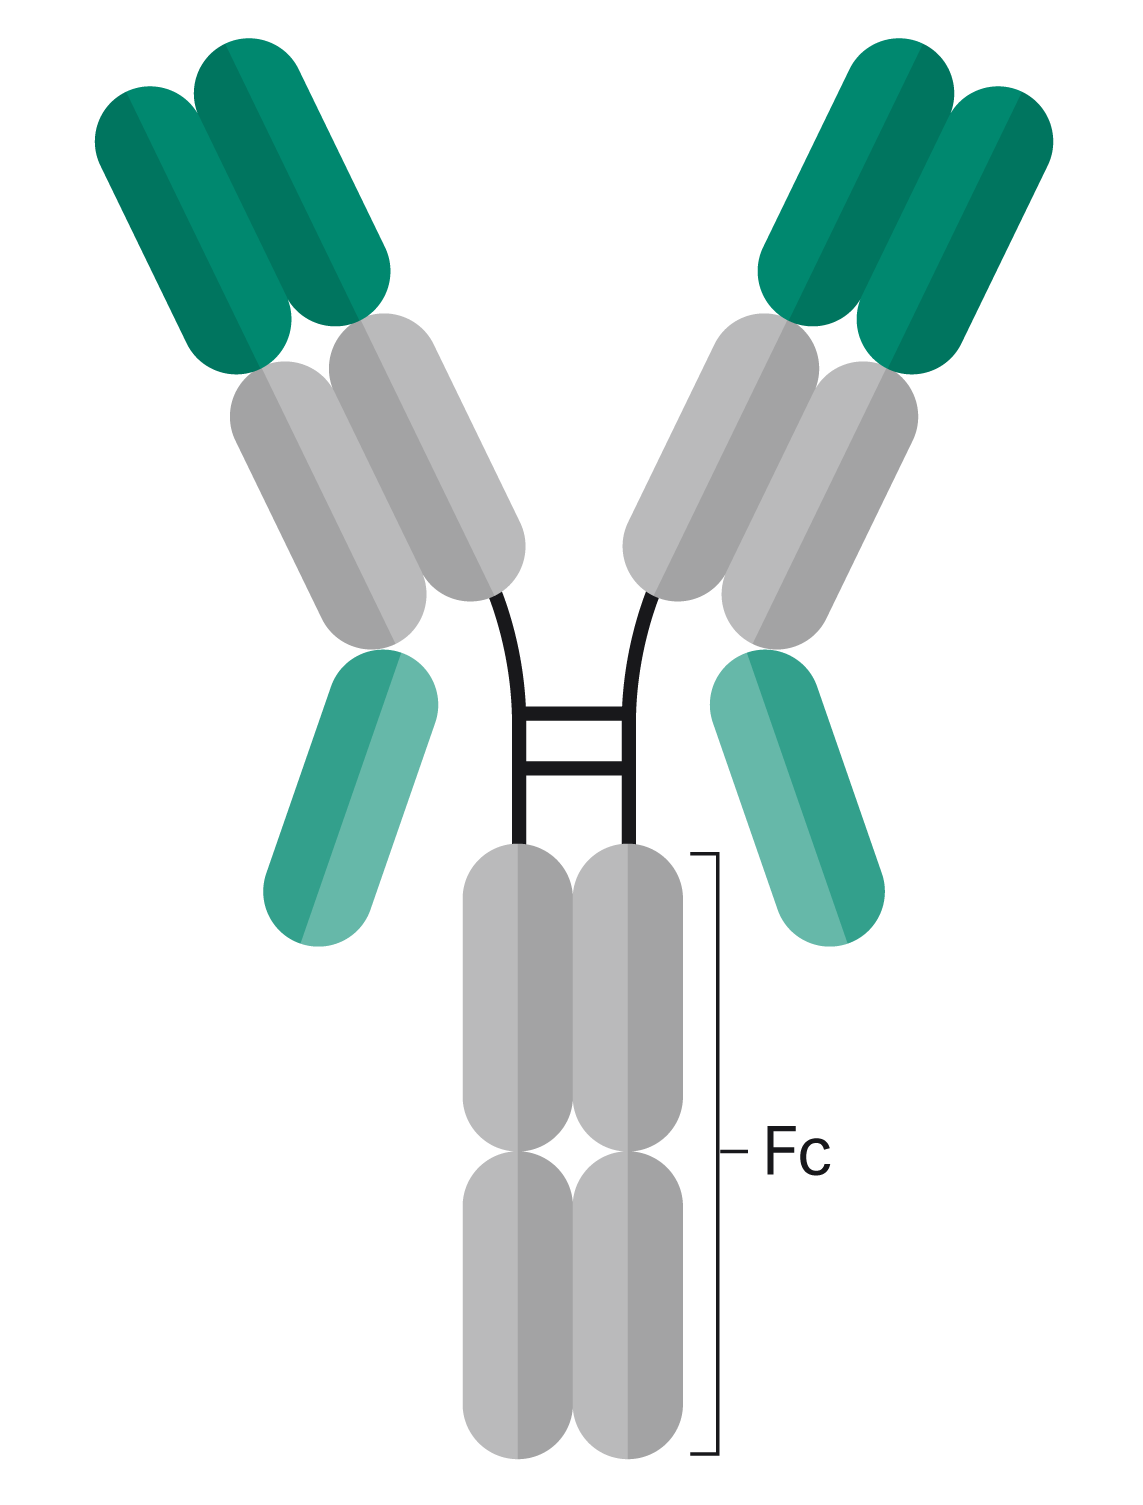 Bispecific antibody is in this case is a recombinant protein attached c terminally to the light chain (light green).